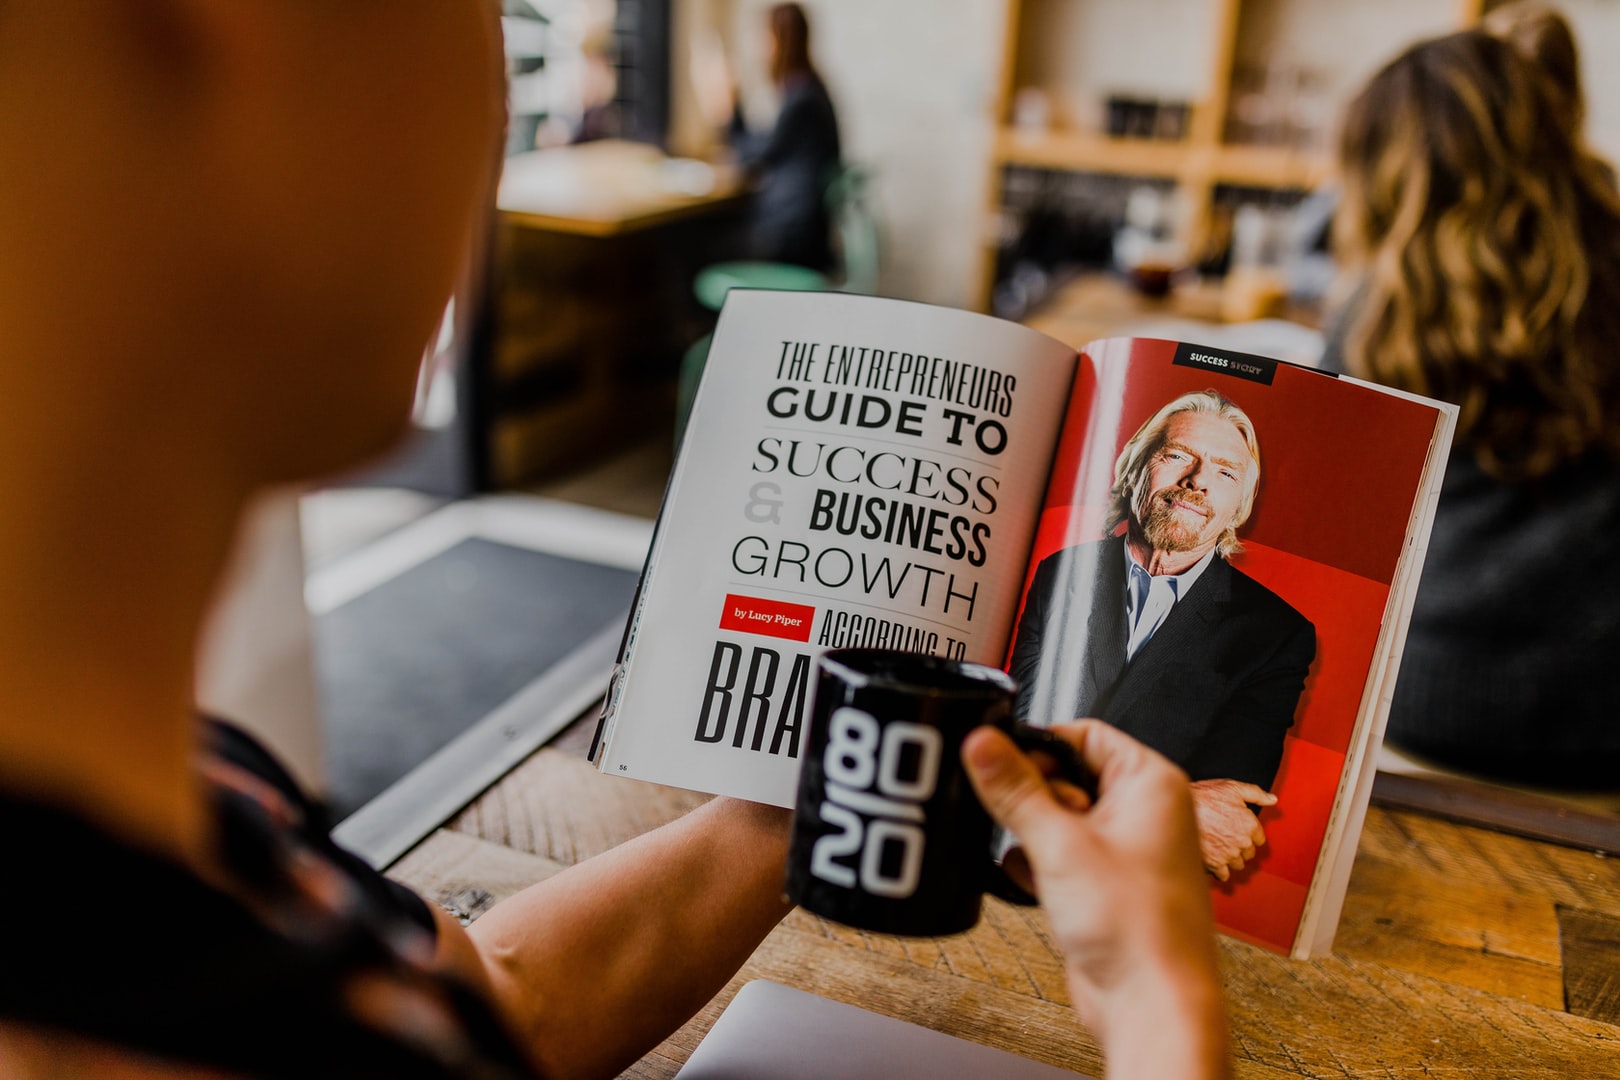 A photo of a book on business success with Richard Branson's photo